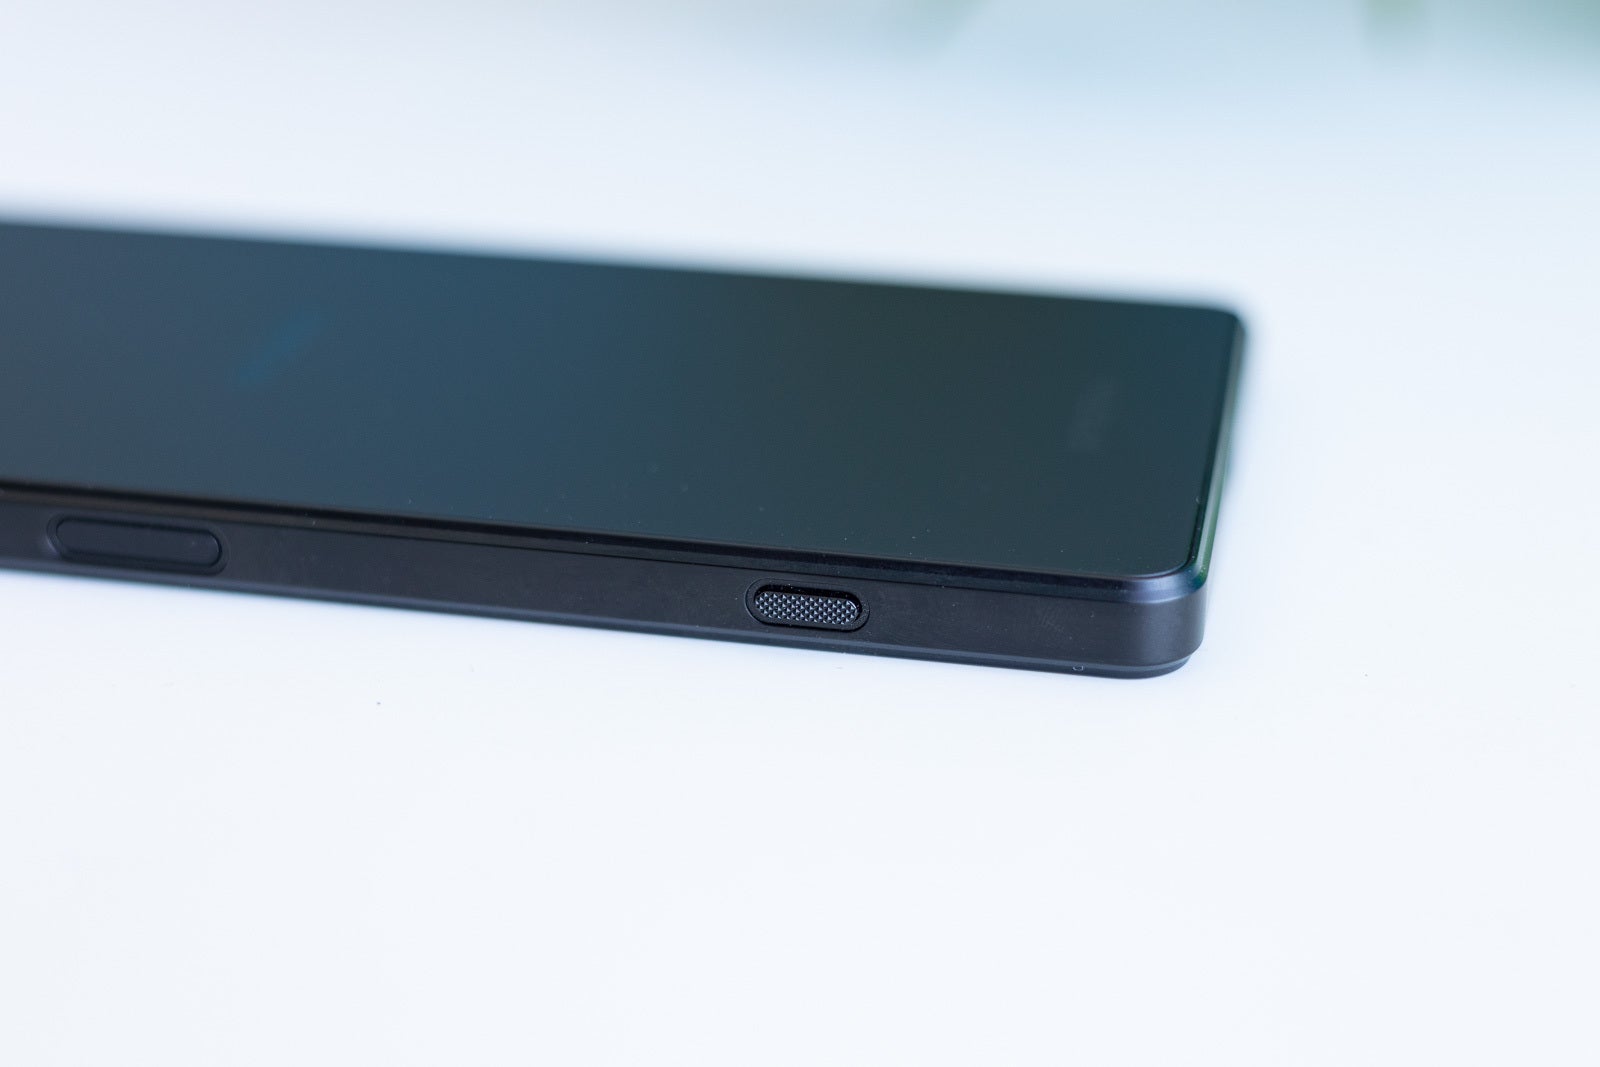 Sony Xperia 1 IV review: unapologetically Sony